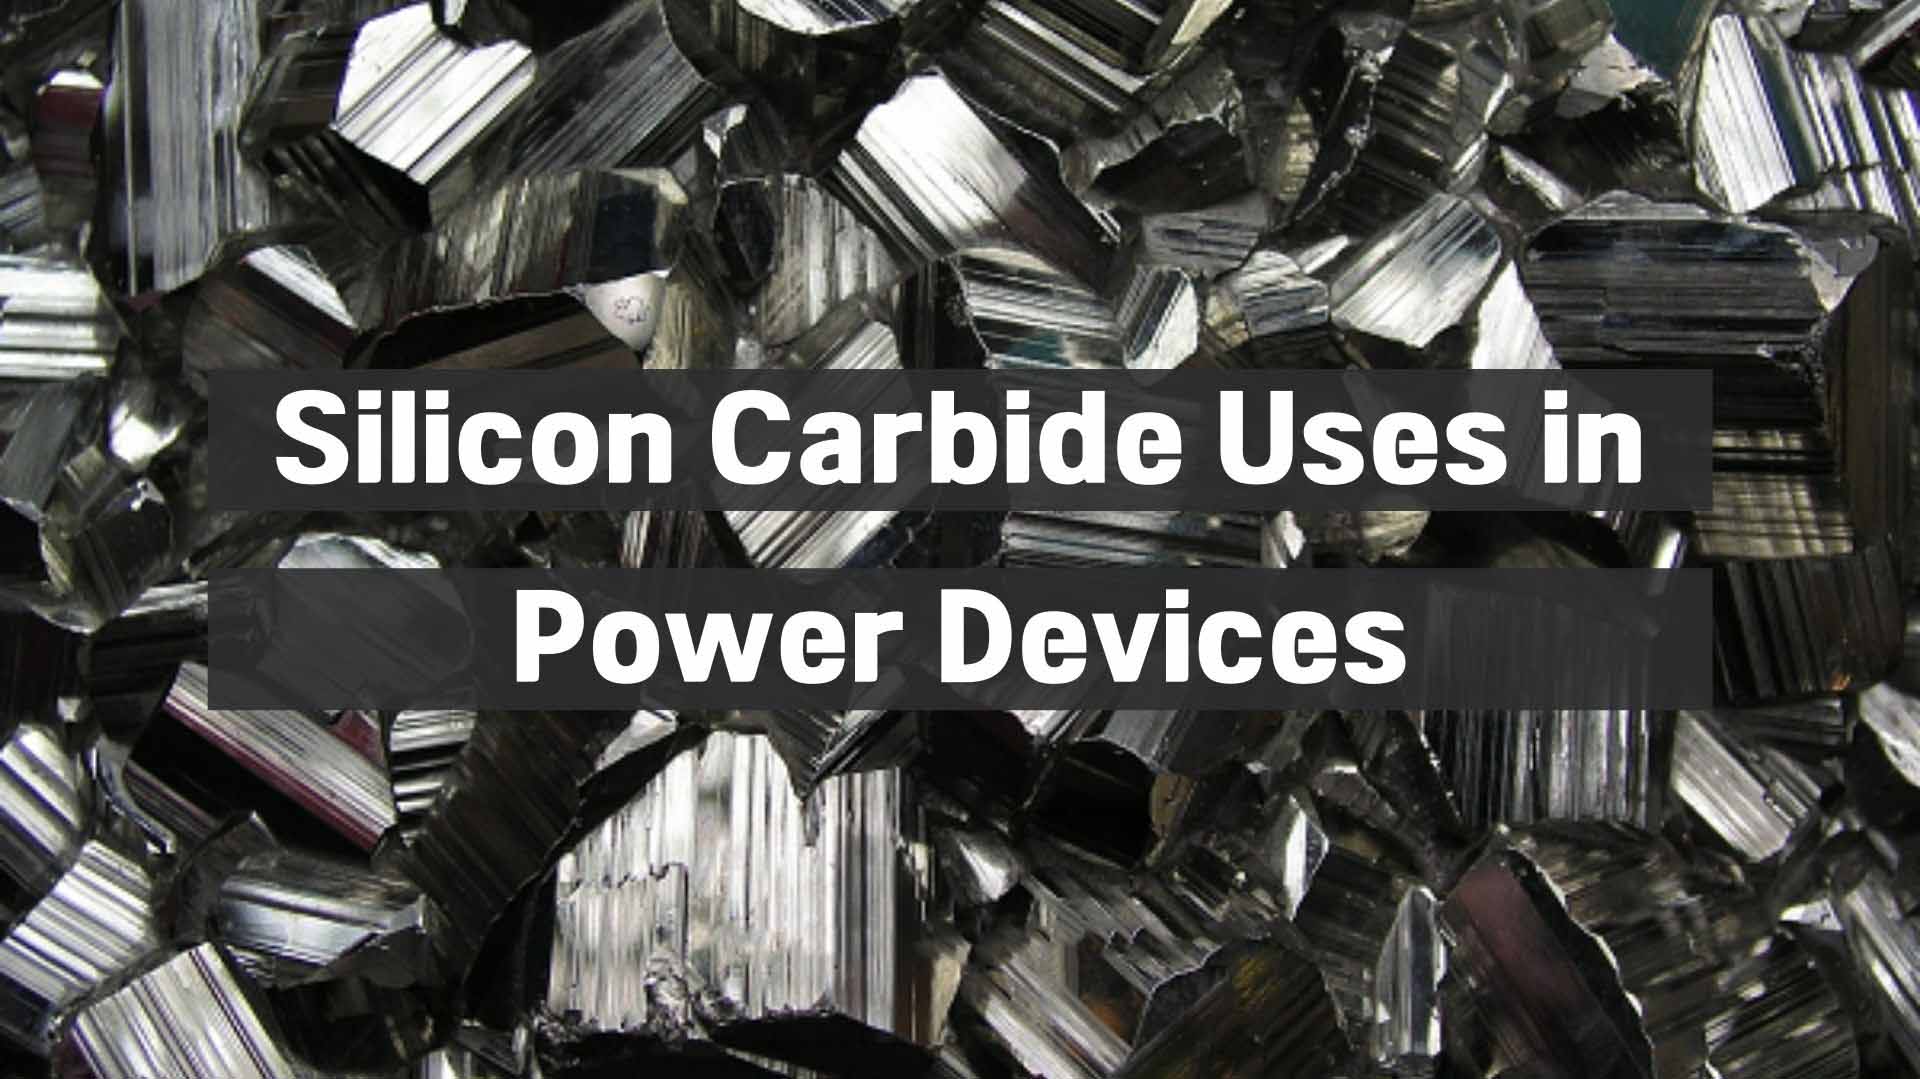 Silicon Carbide Uses in Power Devices